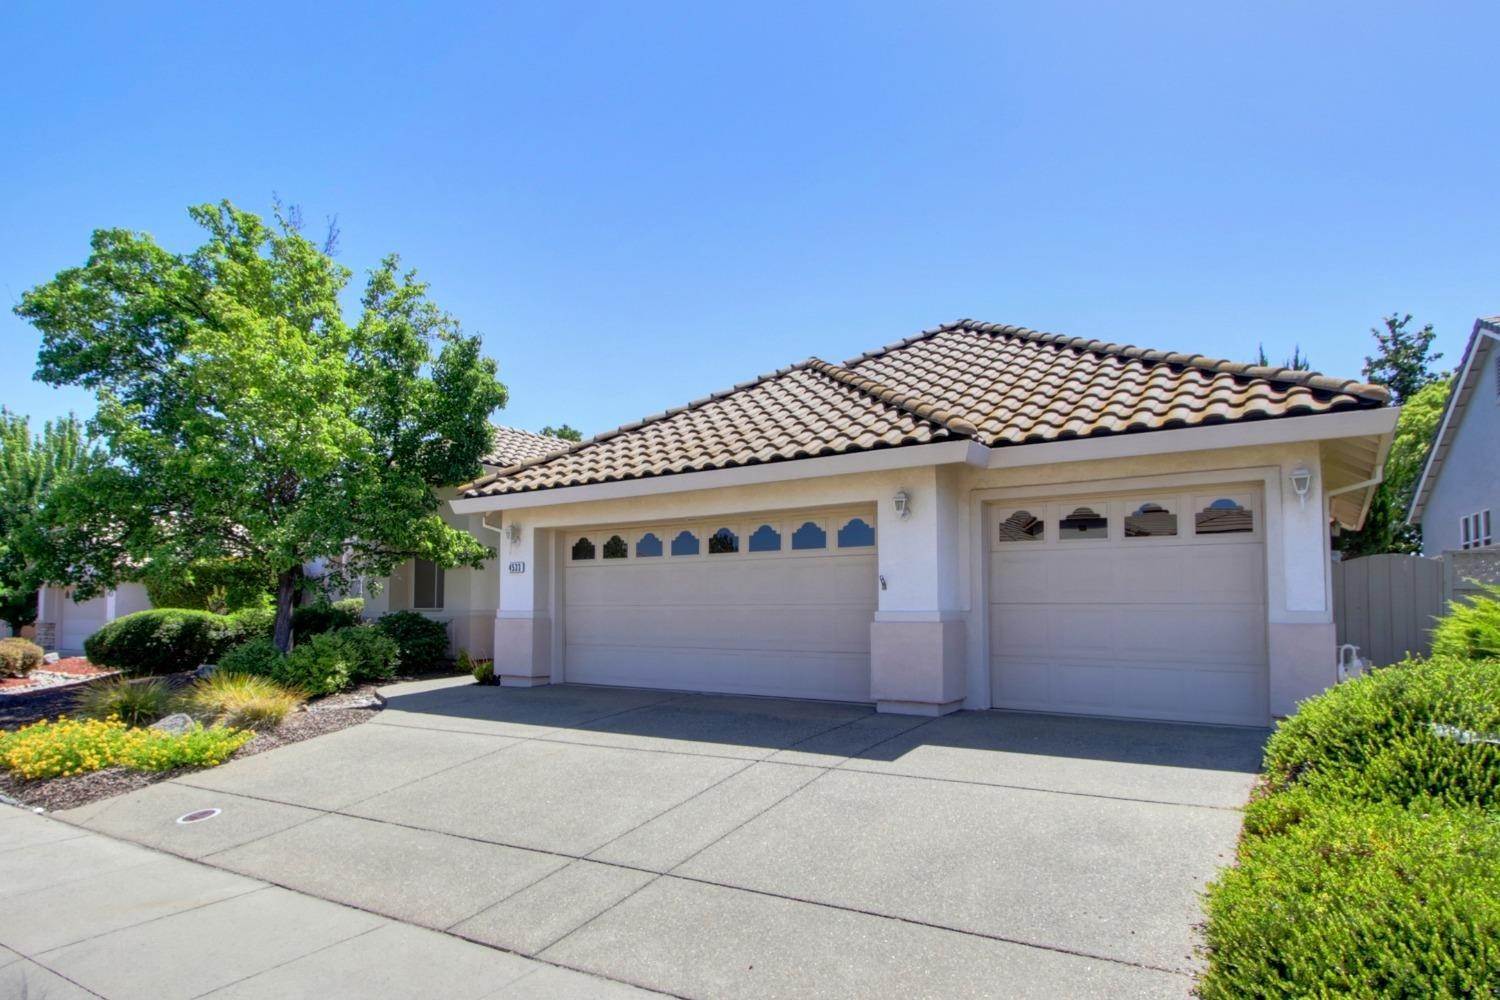 38. Single Family Homes for Active at 4533 Coach Lamp Lane Roseville, California 95747 United States